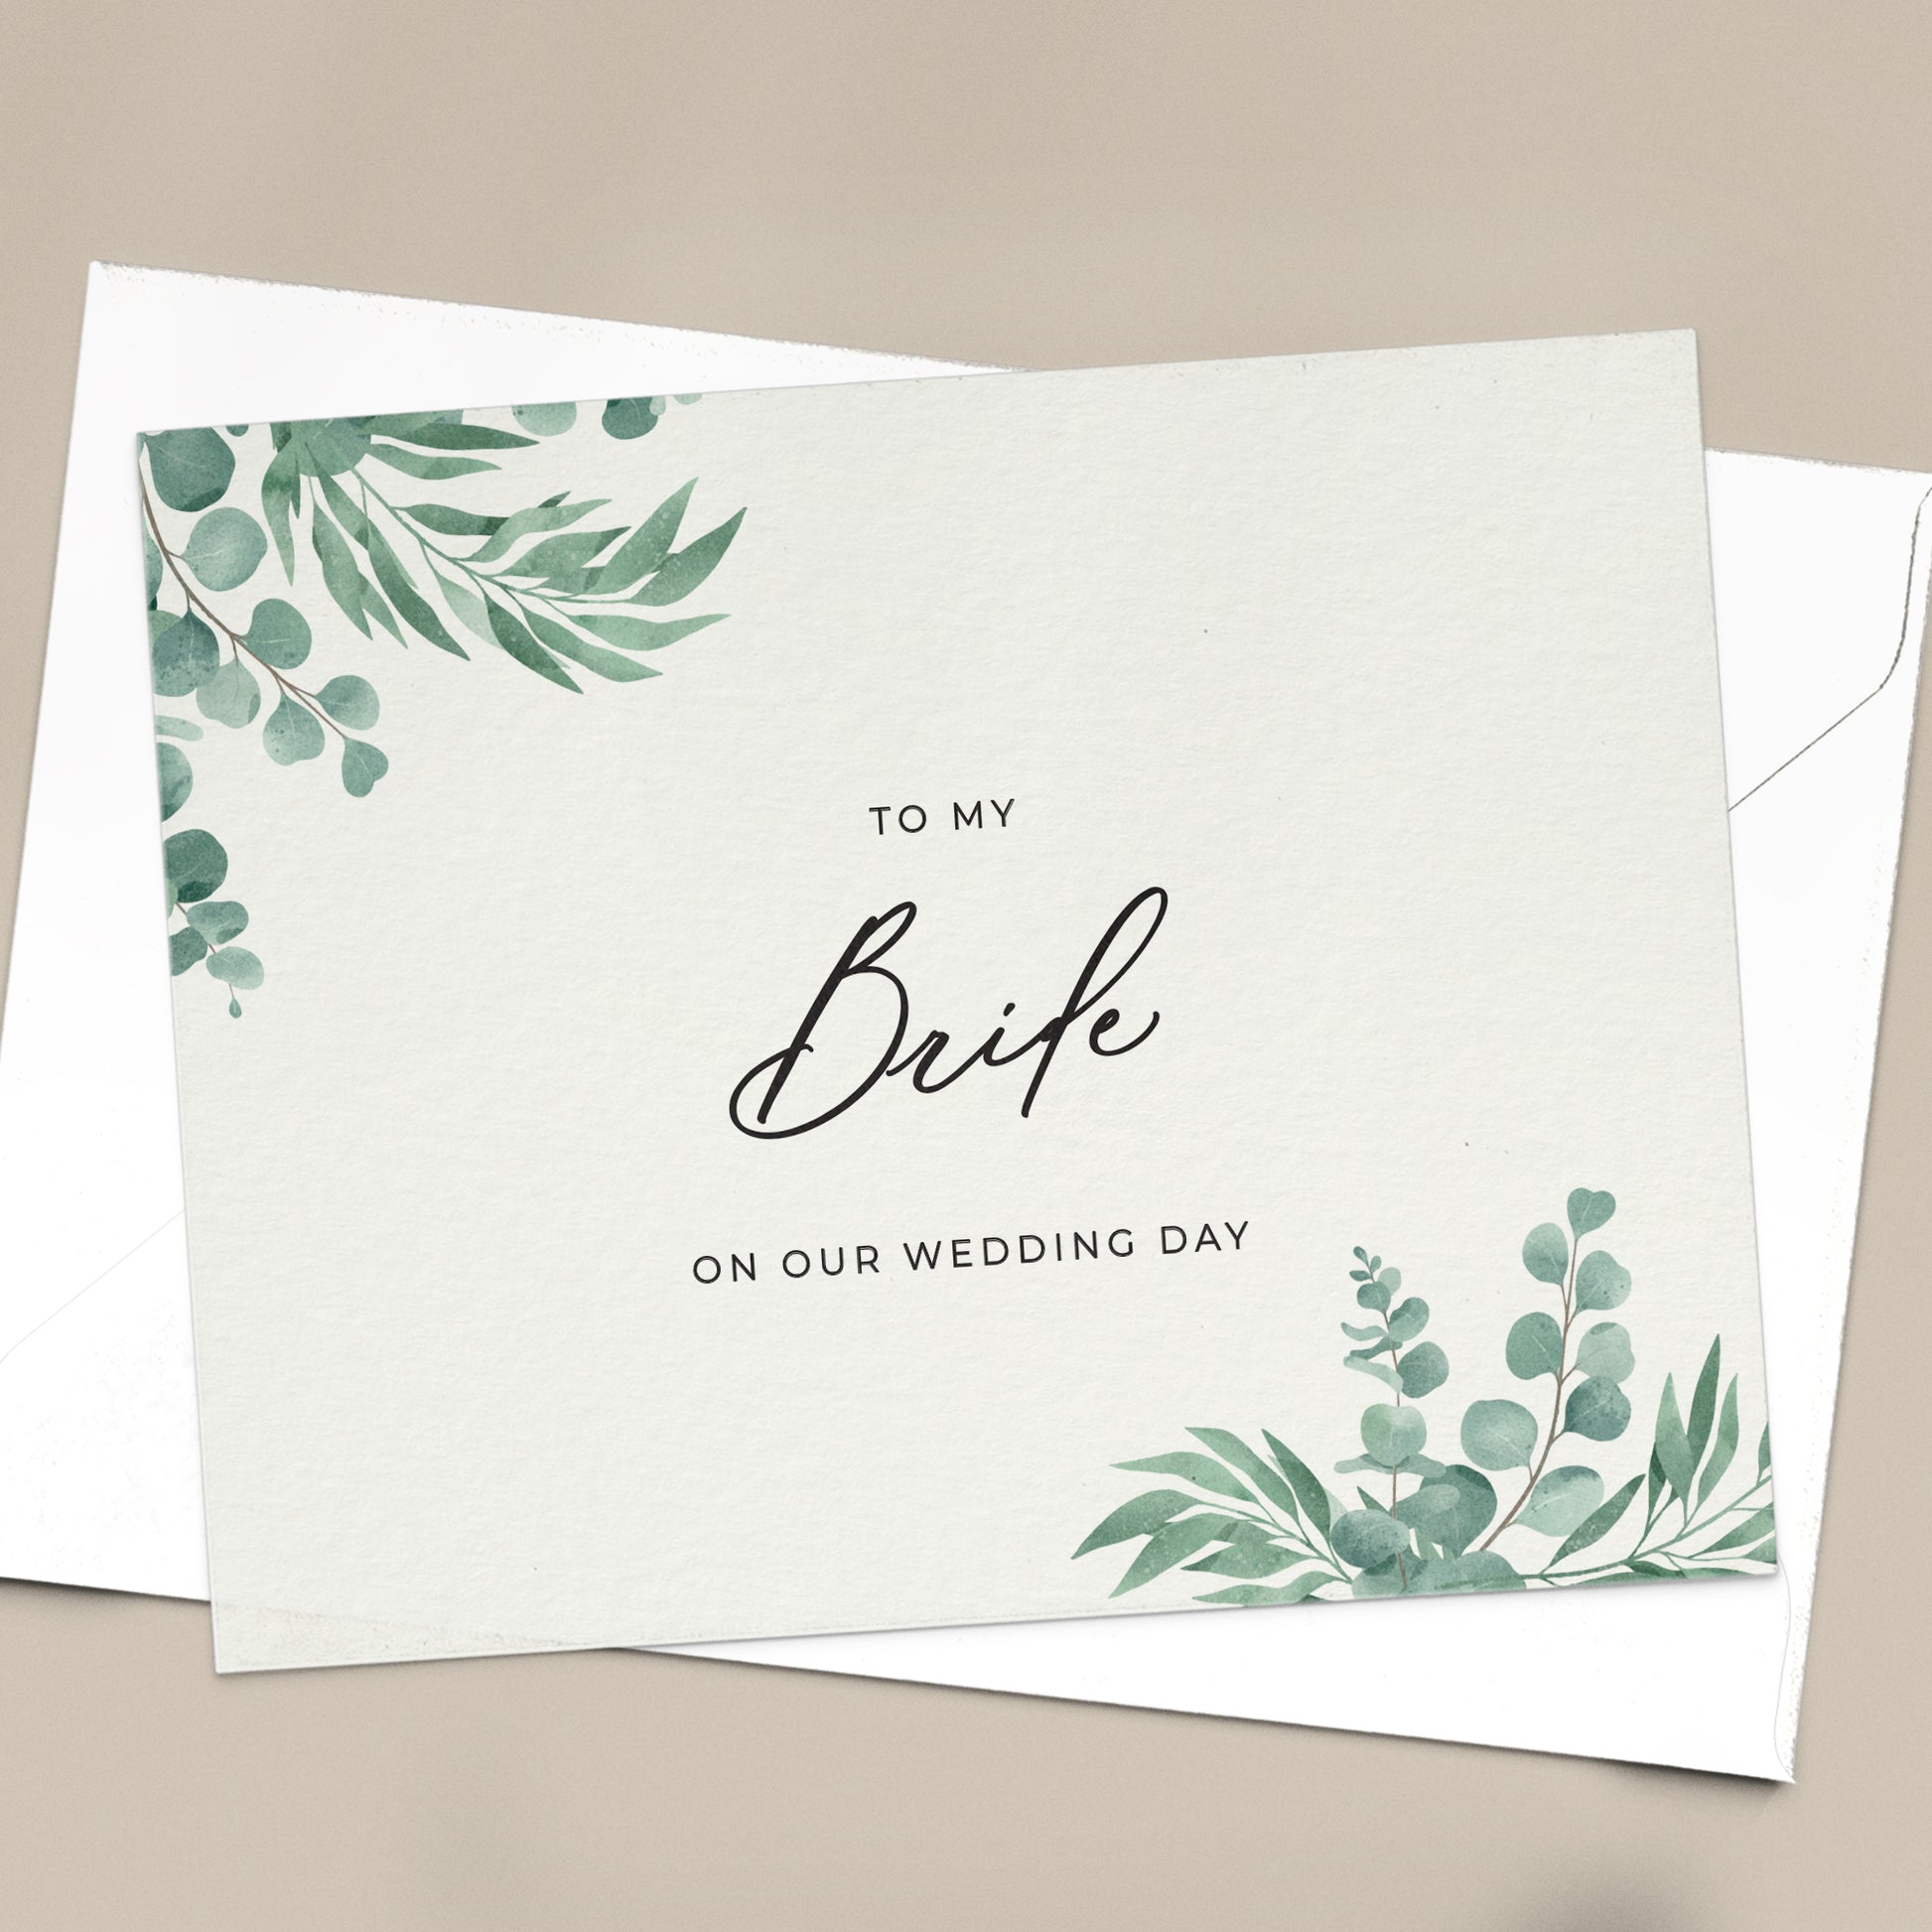 To my bride on our wedding day note card in greenery design with eucalyptus leaves and calligraphy font from XOXOKristen.